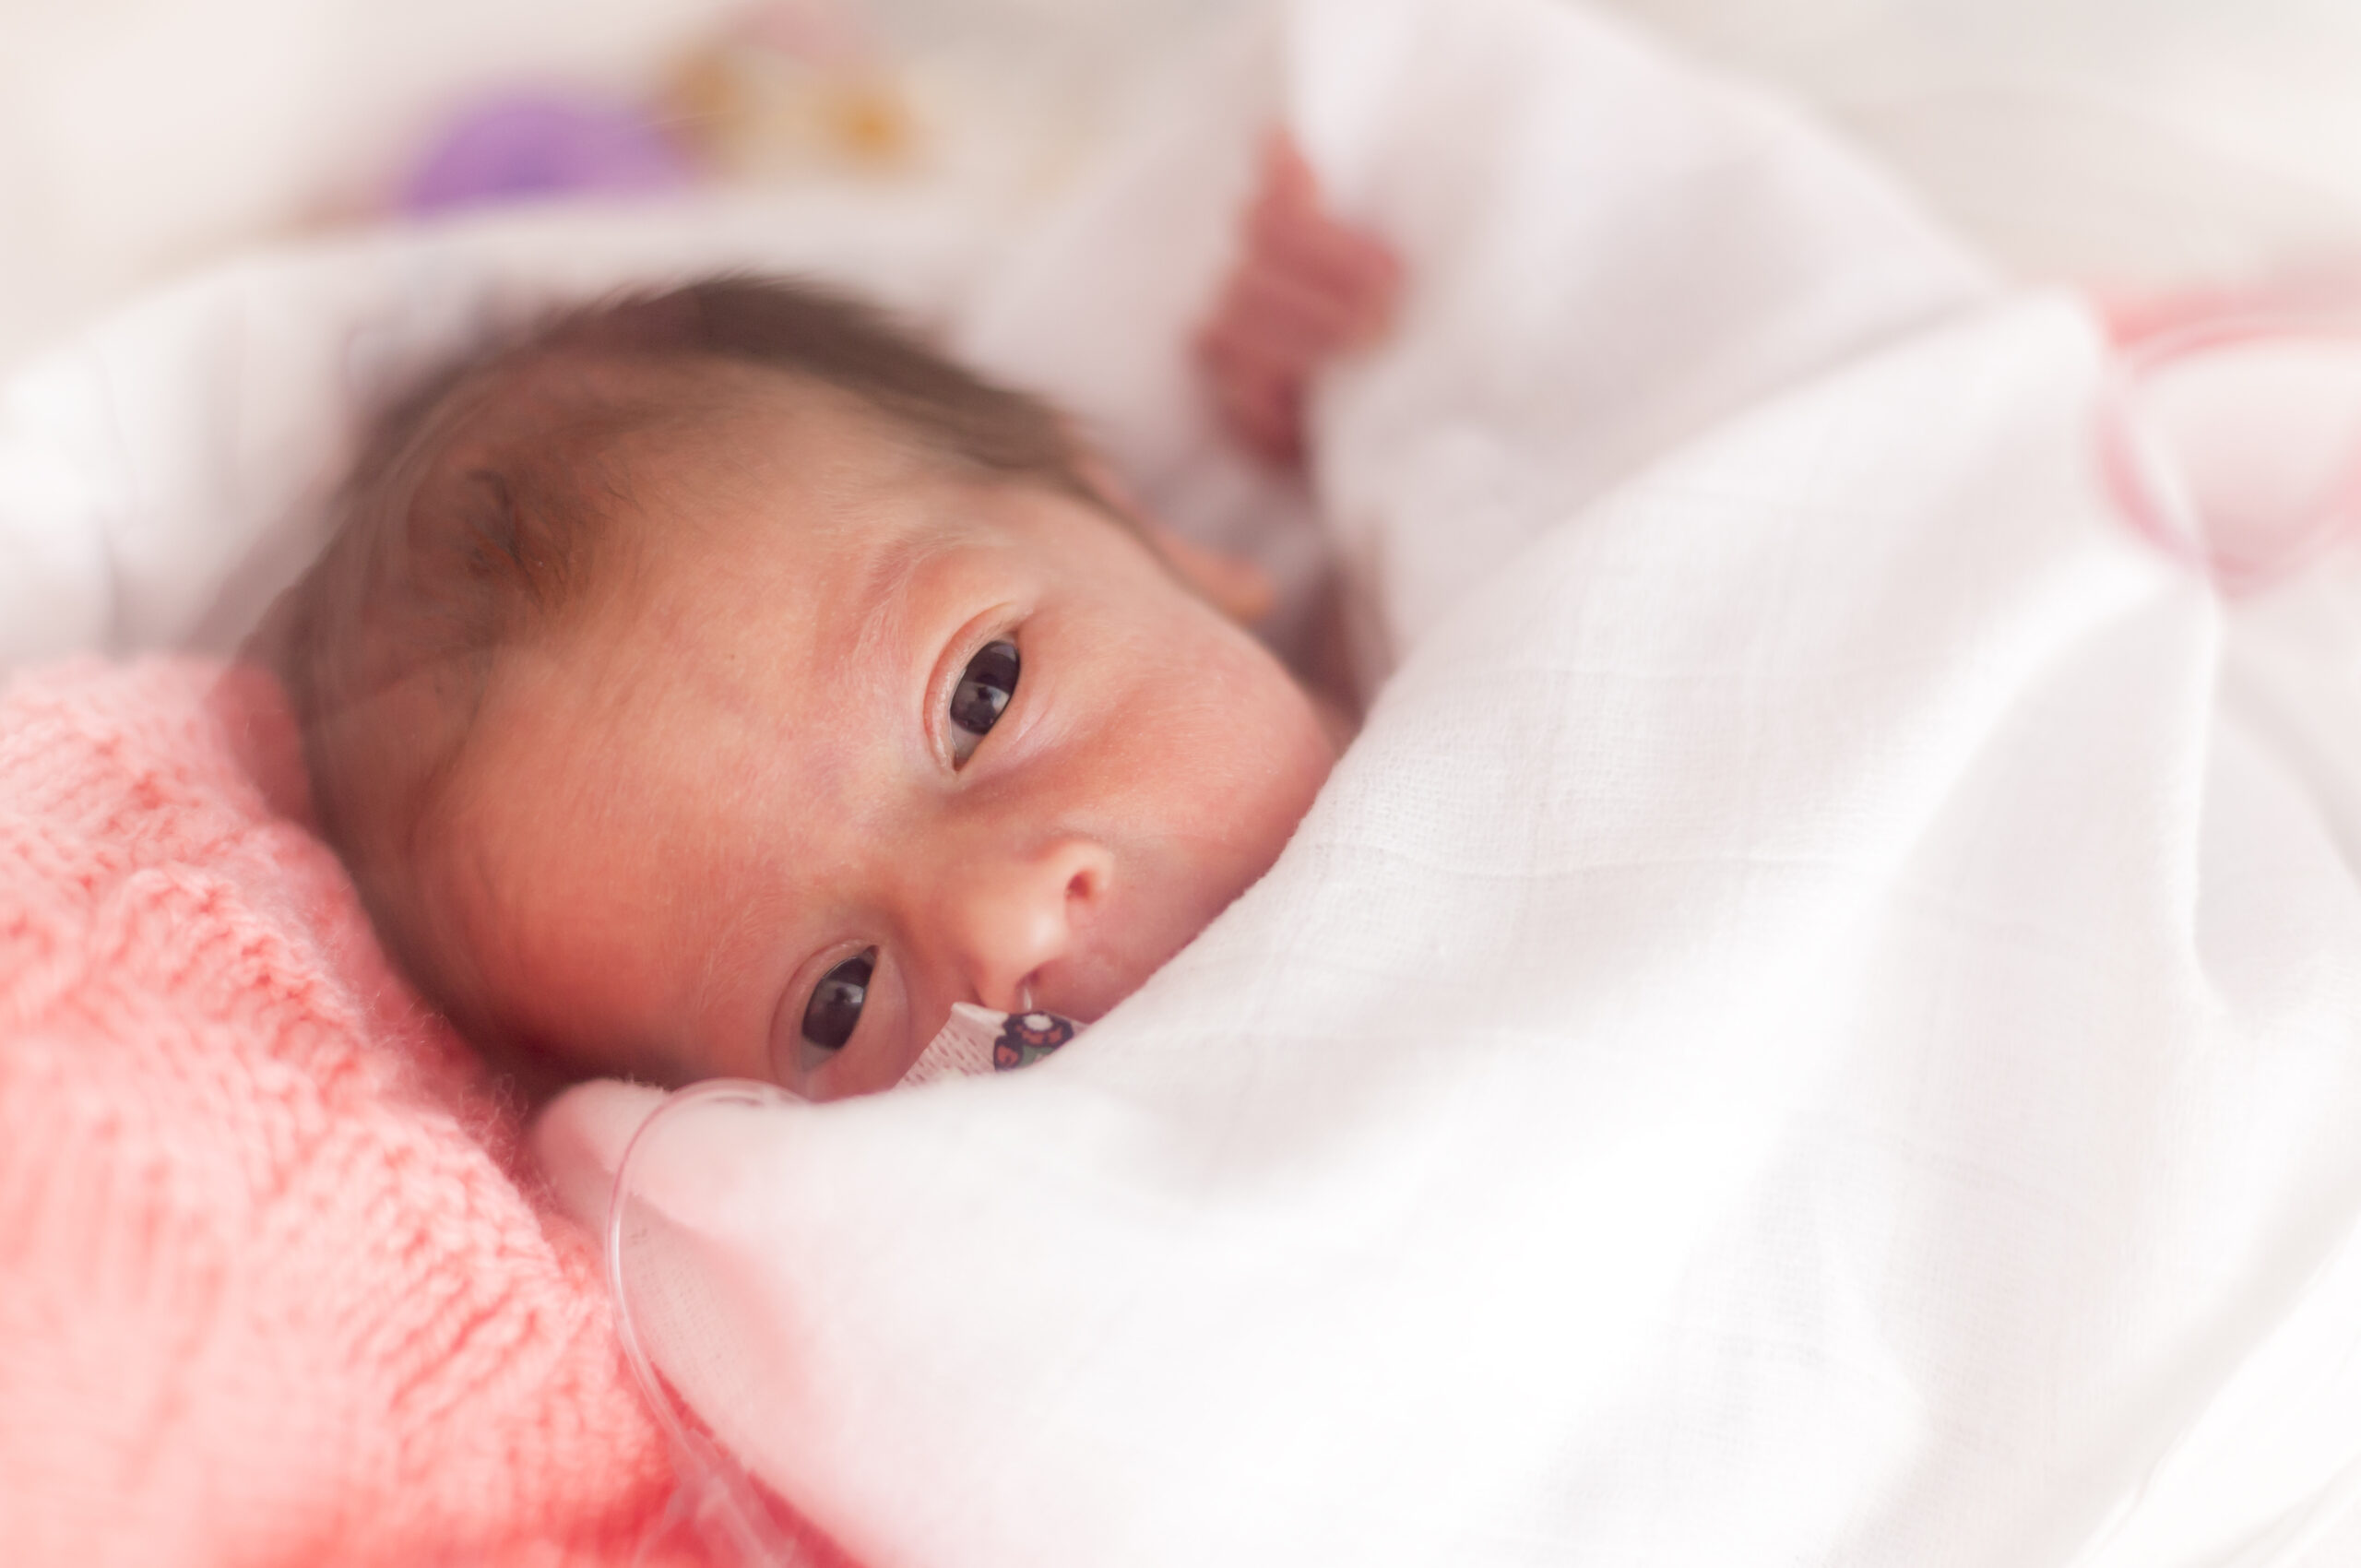 newborn baby with breathing tube in nose, swaddled in blankets looking at camera